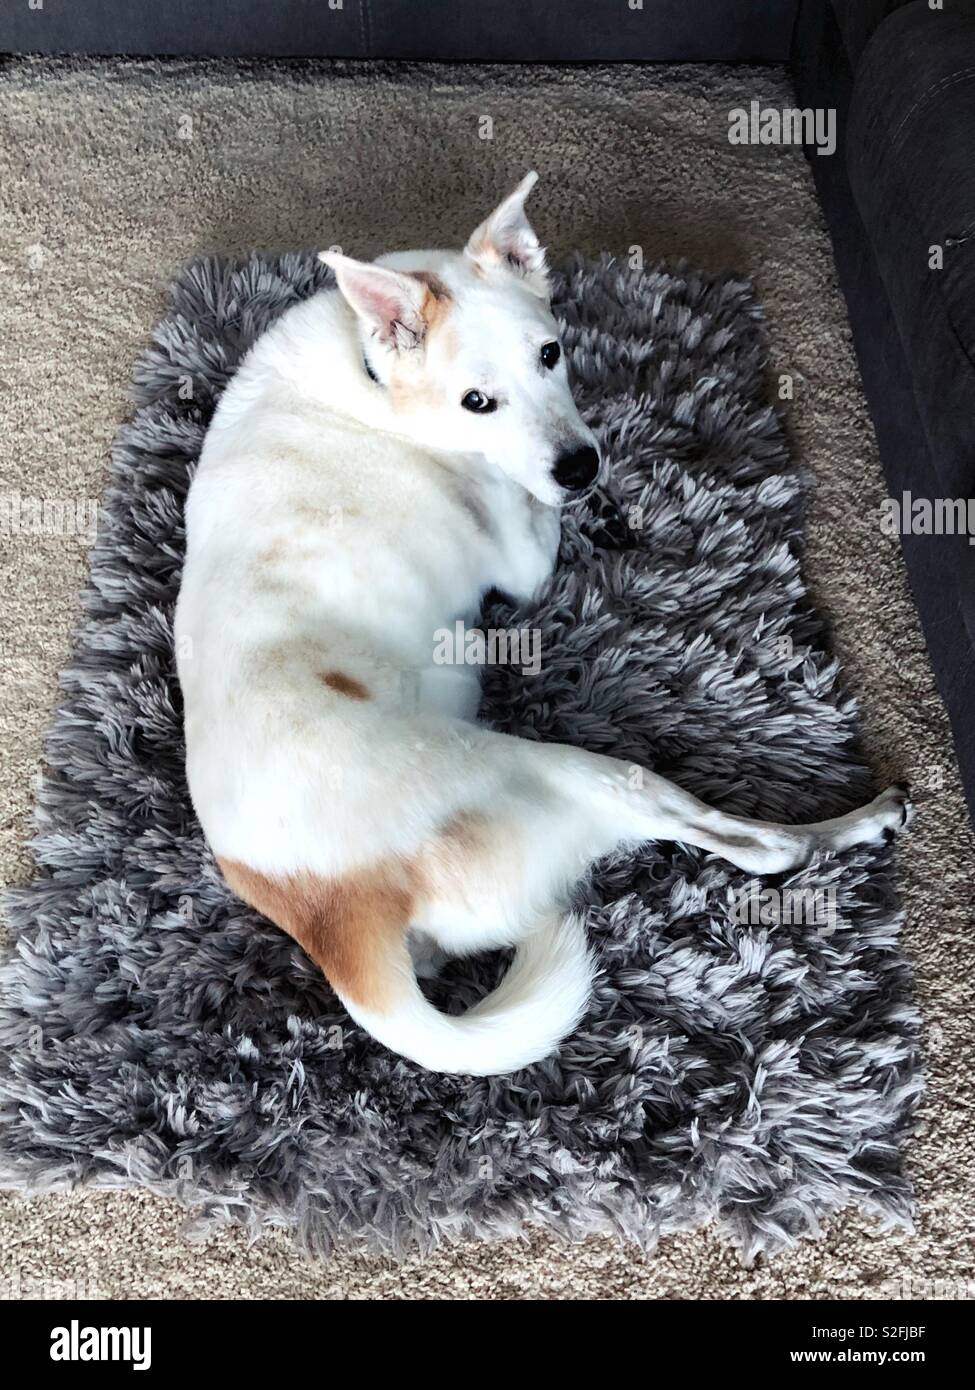 A white dog on a faux fur rug. Stock Photo